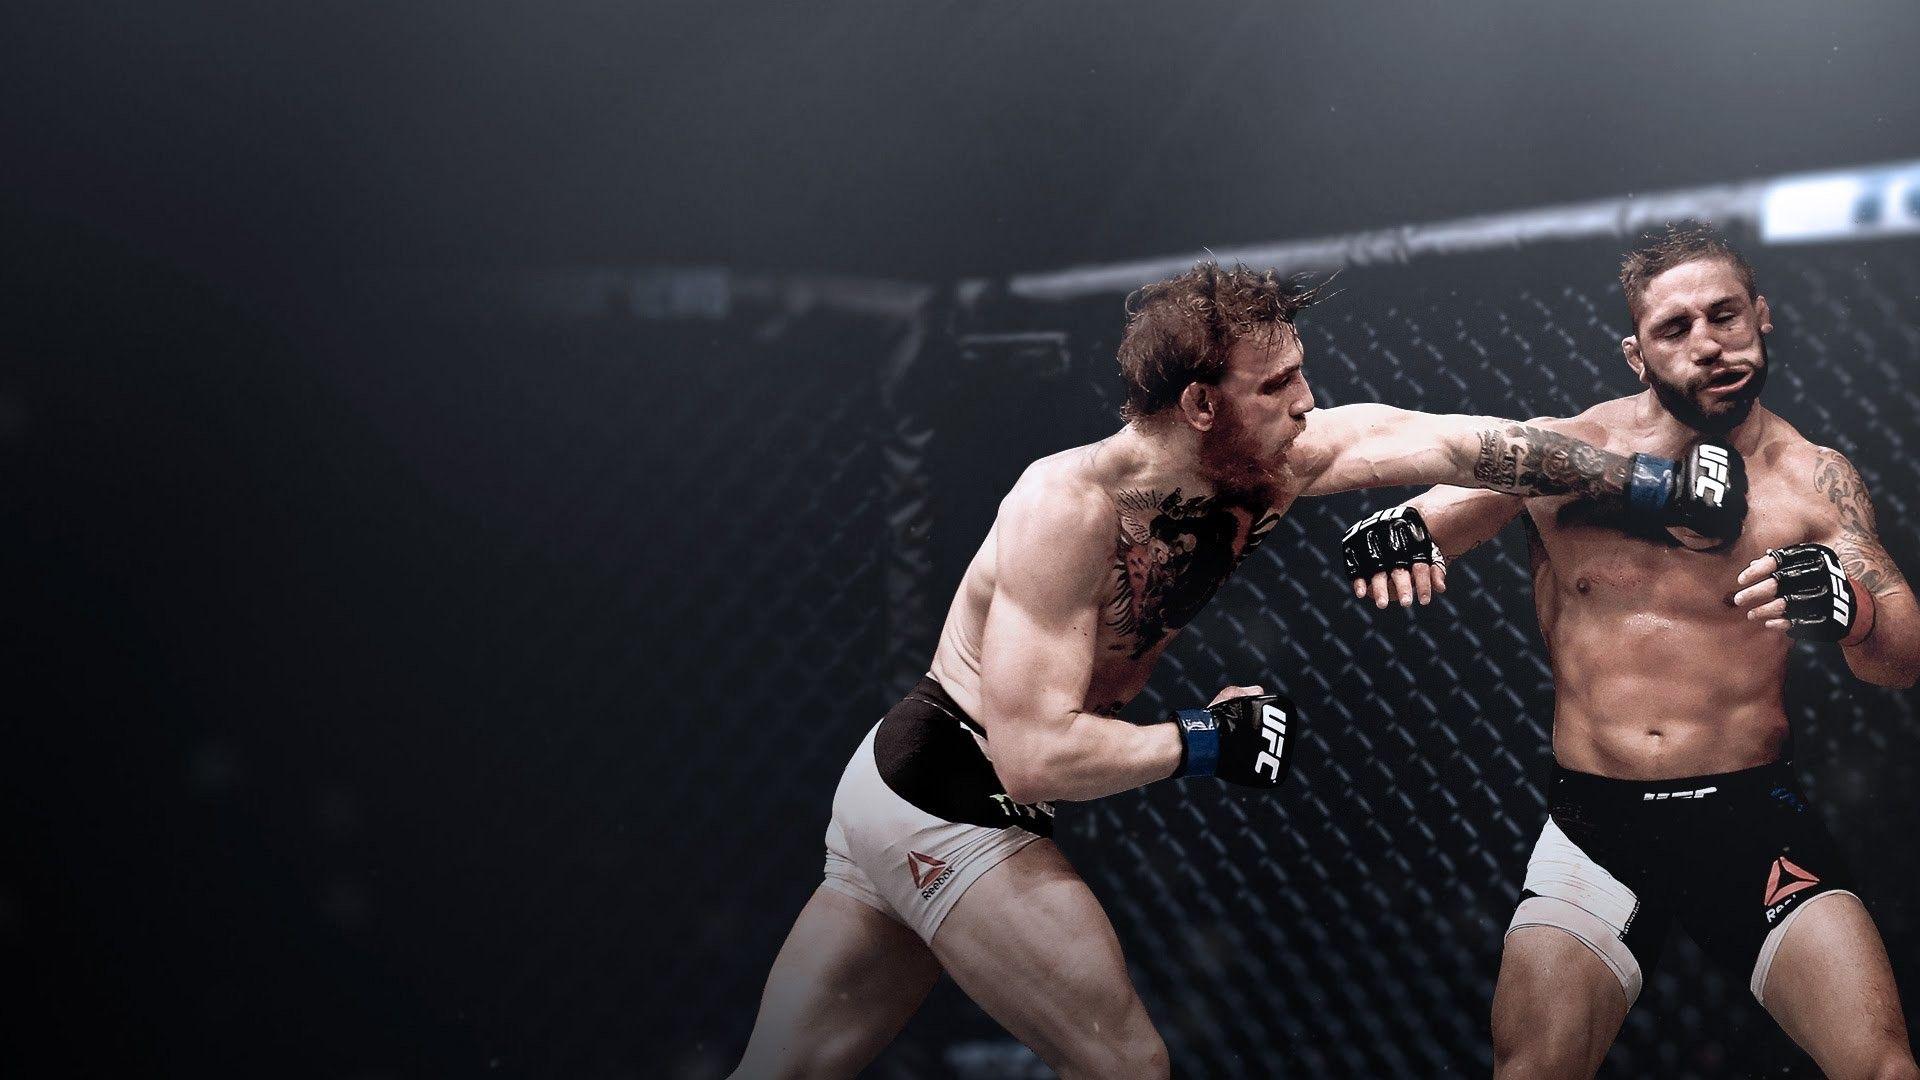 25 Excellent 4k wallpaper ufc You Can Use It At No Cost Aesthetic Arena